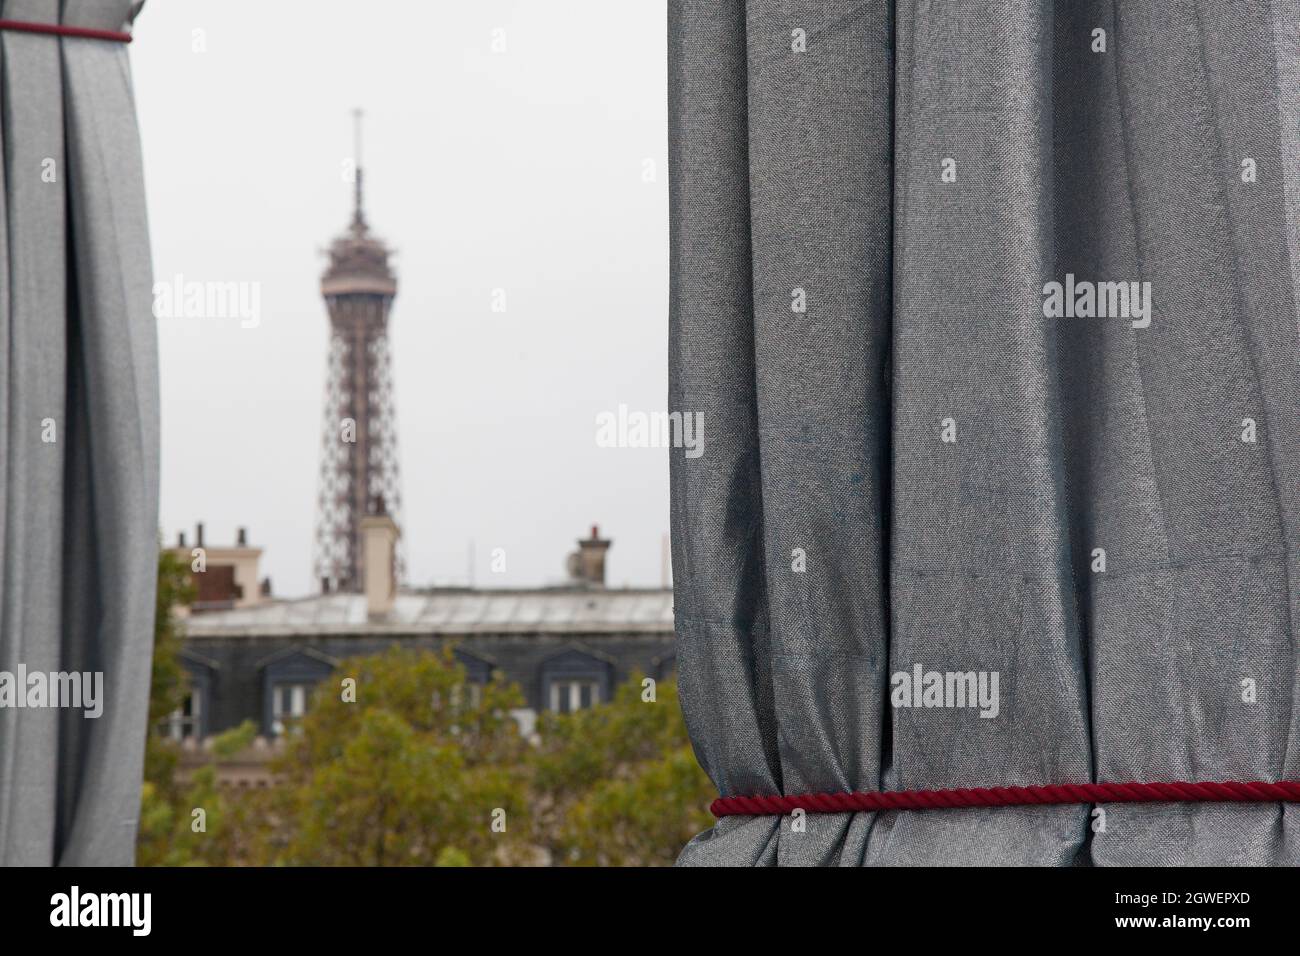 Paris, France, 3 October 2021: Heavy rain on the final day of the Arc de Triomphe Wrapped by Christo and Jeanne-Claude did not keep the crowds away. With rain macs and umbrellas, tourists and art lovers flocked to the Place Charles de Gaulle, which has been pedestrianised for the weekend. The Eiffel Tower was in the distance with it's top in the clouds. Anna Watson/Alamy Live News Stock Photo